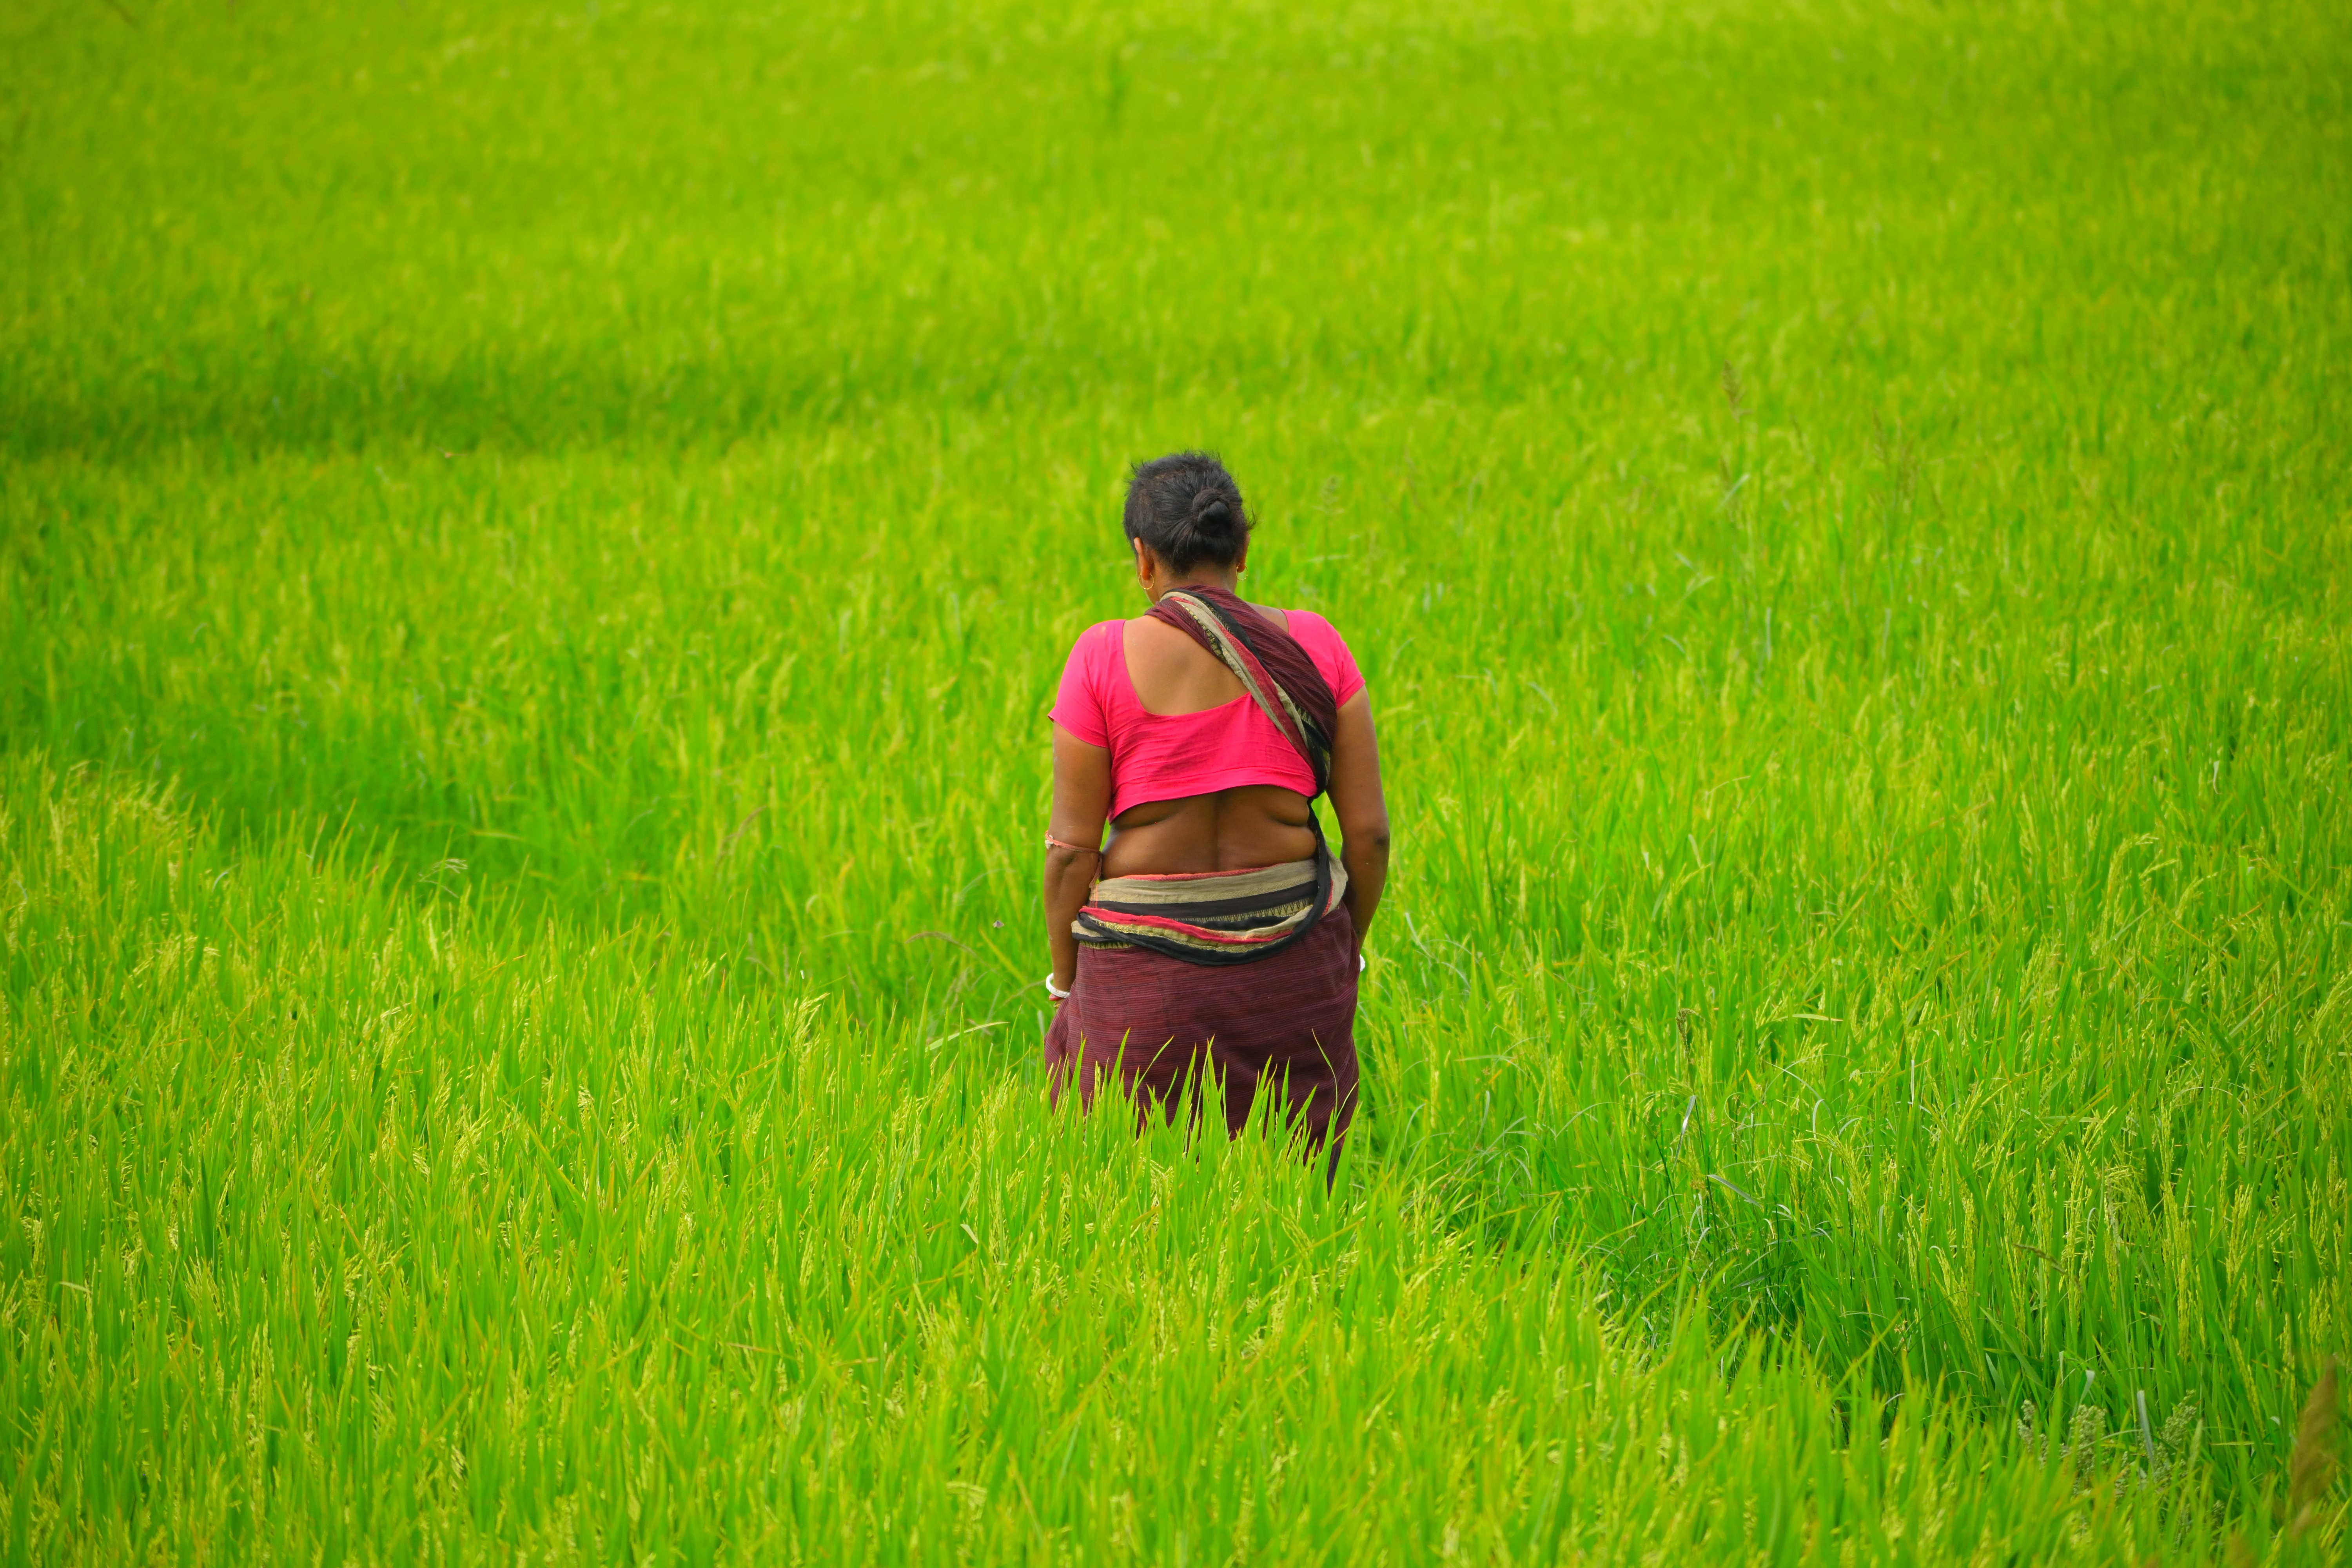 a woman wearing a bright pink outfit walks through a field